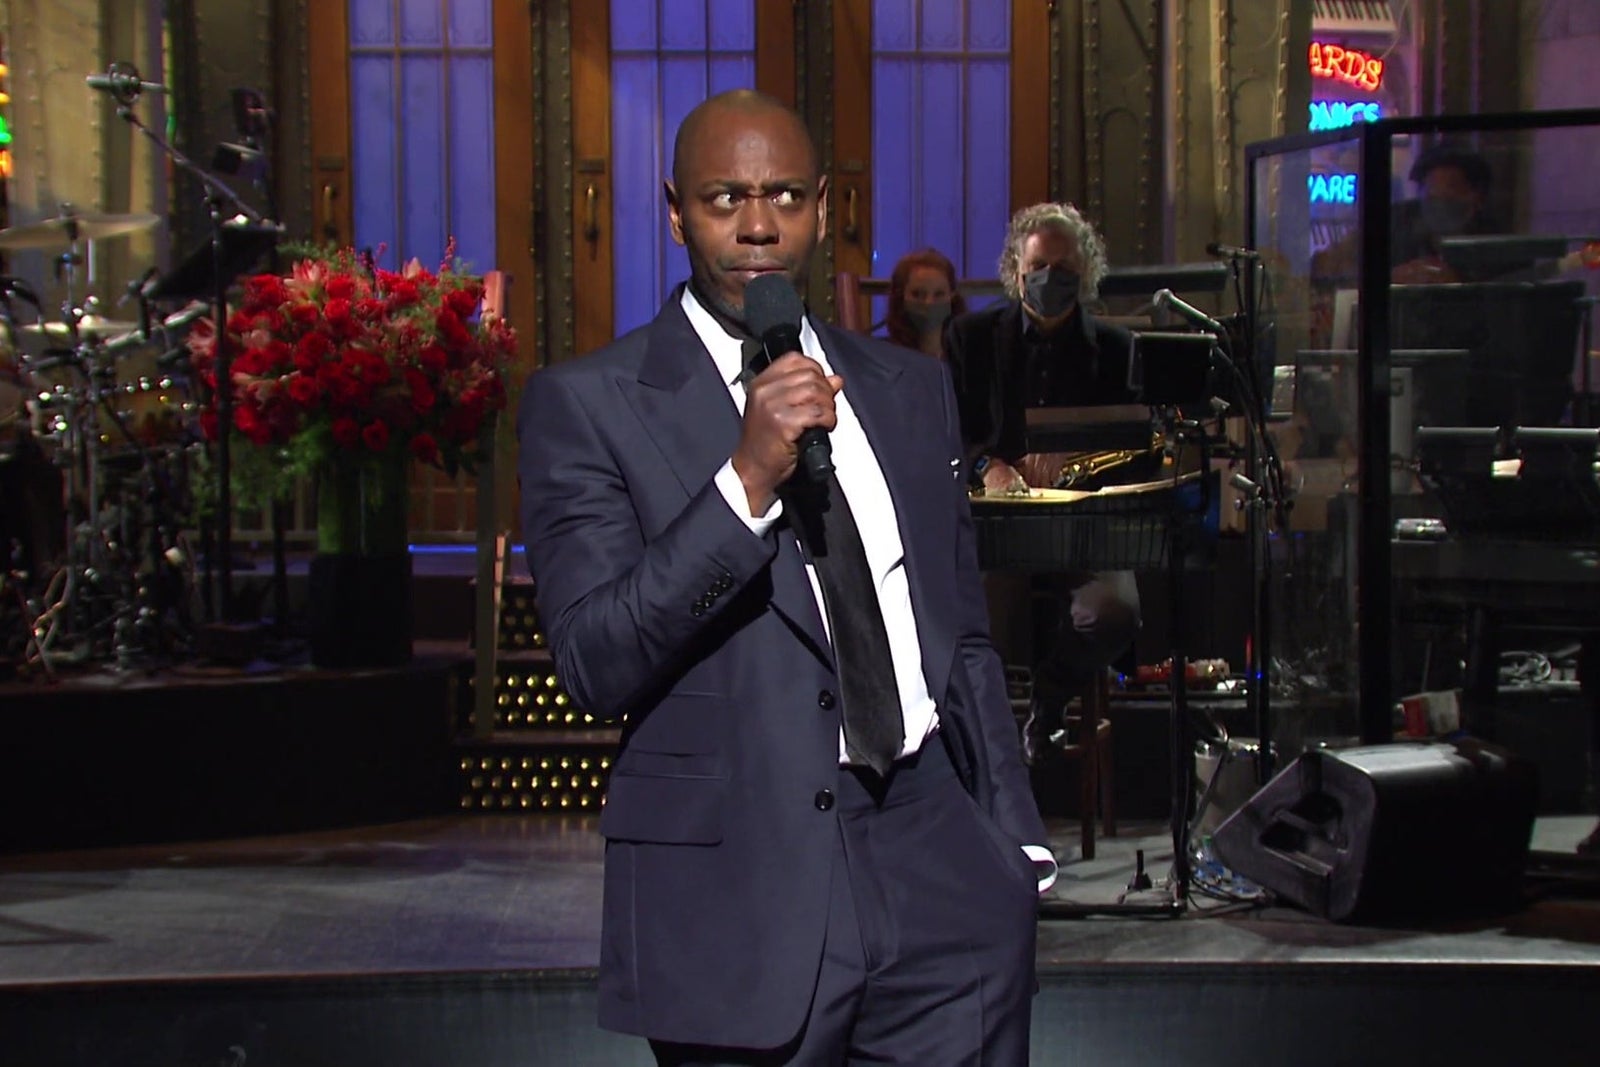 Dave Chappelle on SNL The standup returns to Saturday Night Live to